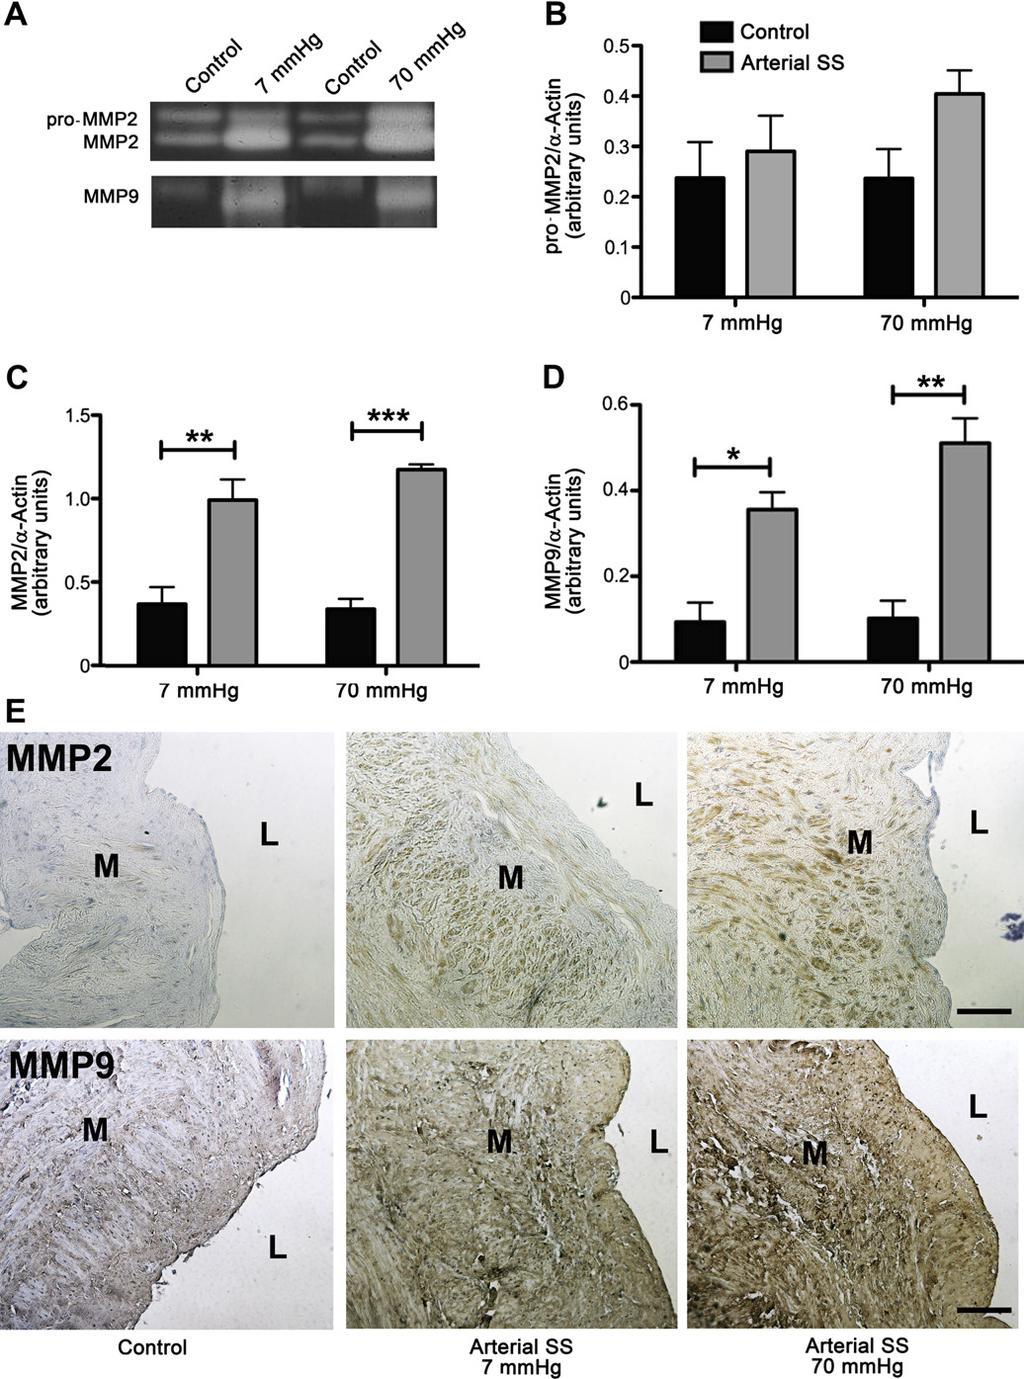 Volume 57, Number 5 Berard et al 1377 Fig 4. The lytic activity of matrix metalloproteinase (MMP)-2 and MMP-9 is increased by arterial shear stress (SS) and blood pressure.